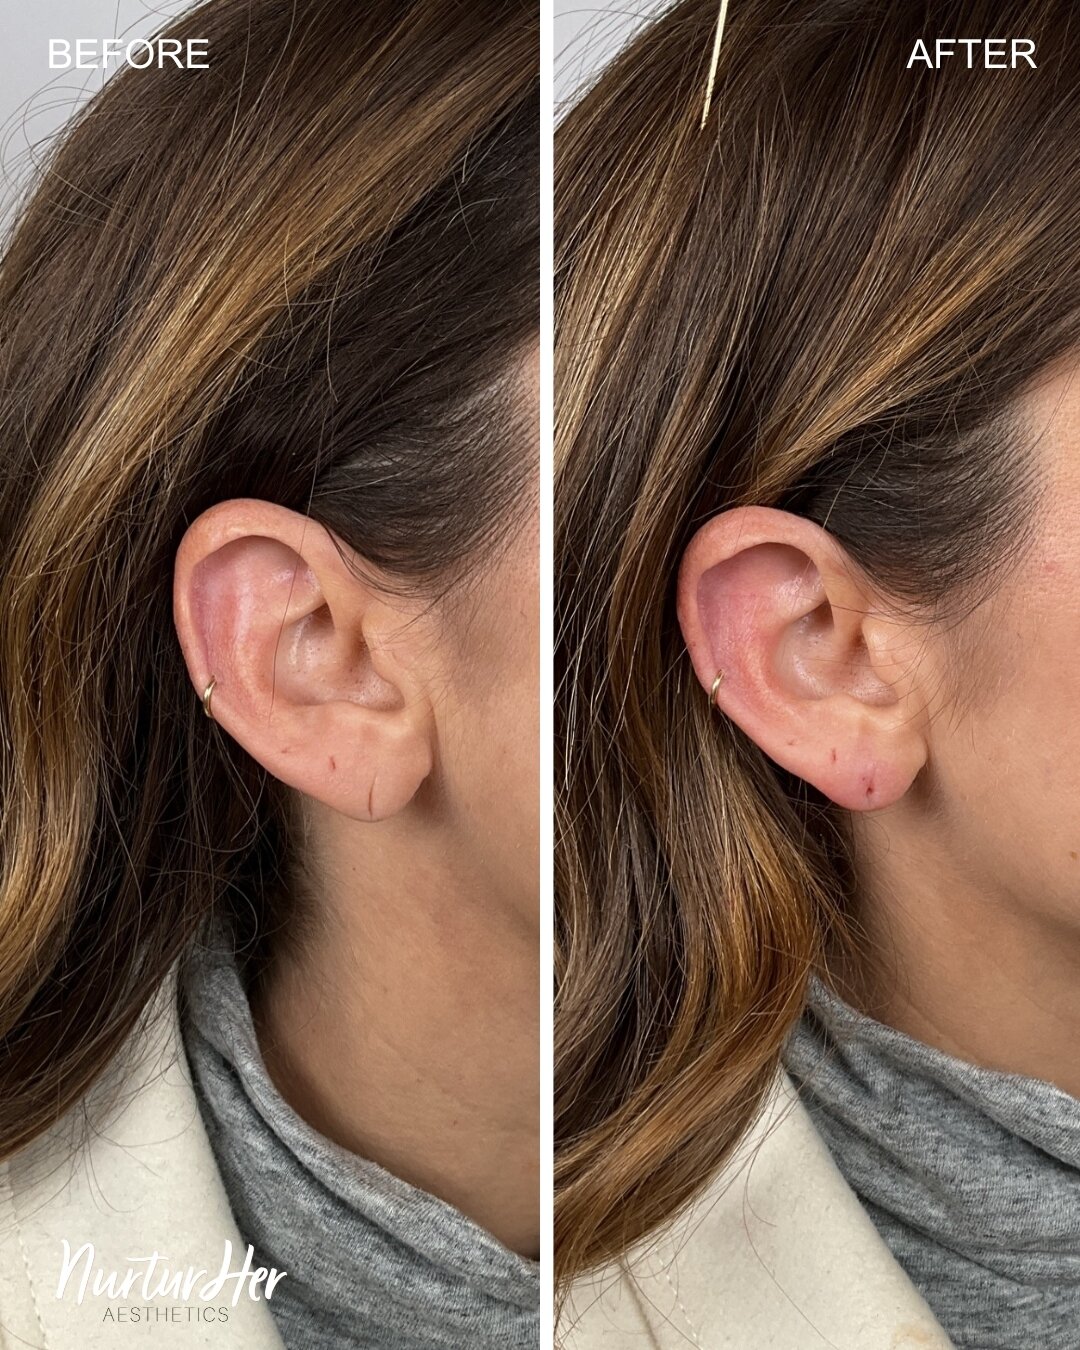 BEFORE AND AFTER⁣⁣Treatment: Earlobe filler
Purpose: Reshape and correct stretched earlobe tissue
Treatment time: 30 minutes
Anesthesia: NA
Downtime: Potential swelling and bruising for a few days

BOOK WITH US 👇🏼
📍#MadisonWI #Sunprairie
📧 nurtur